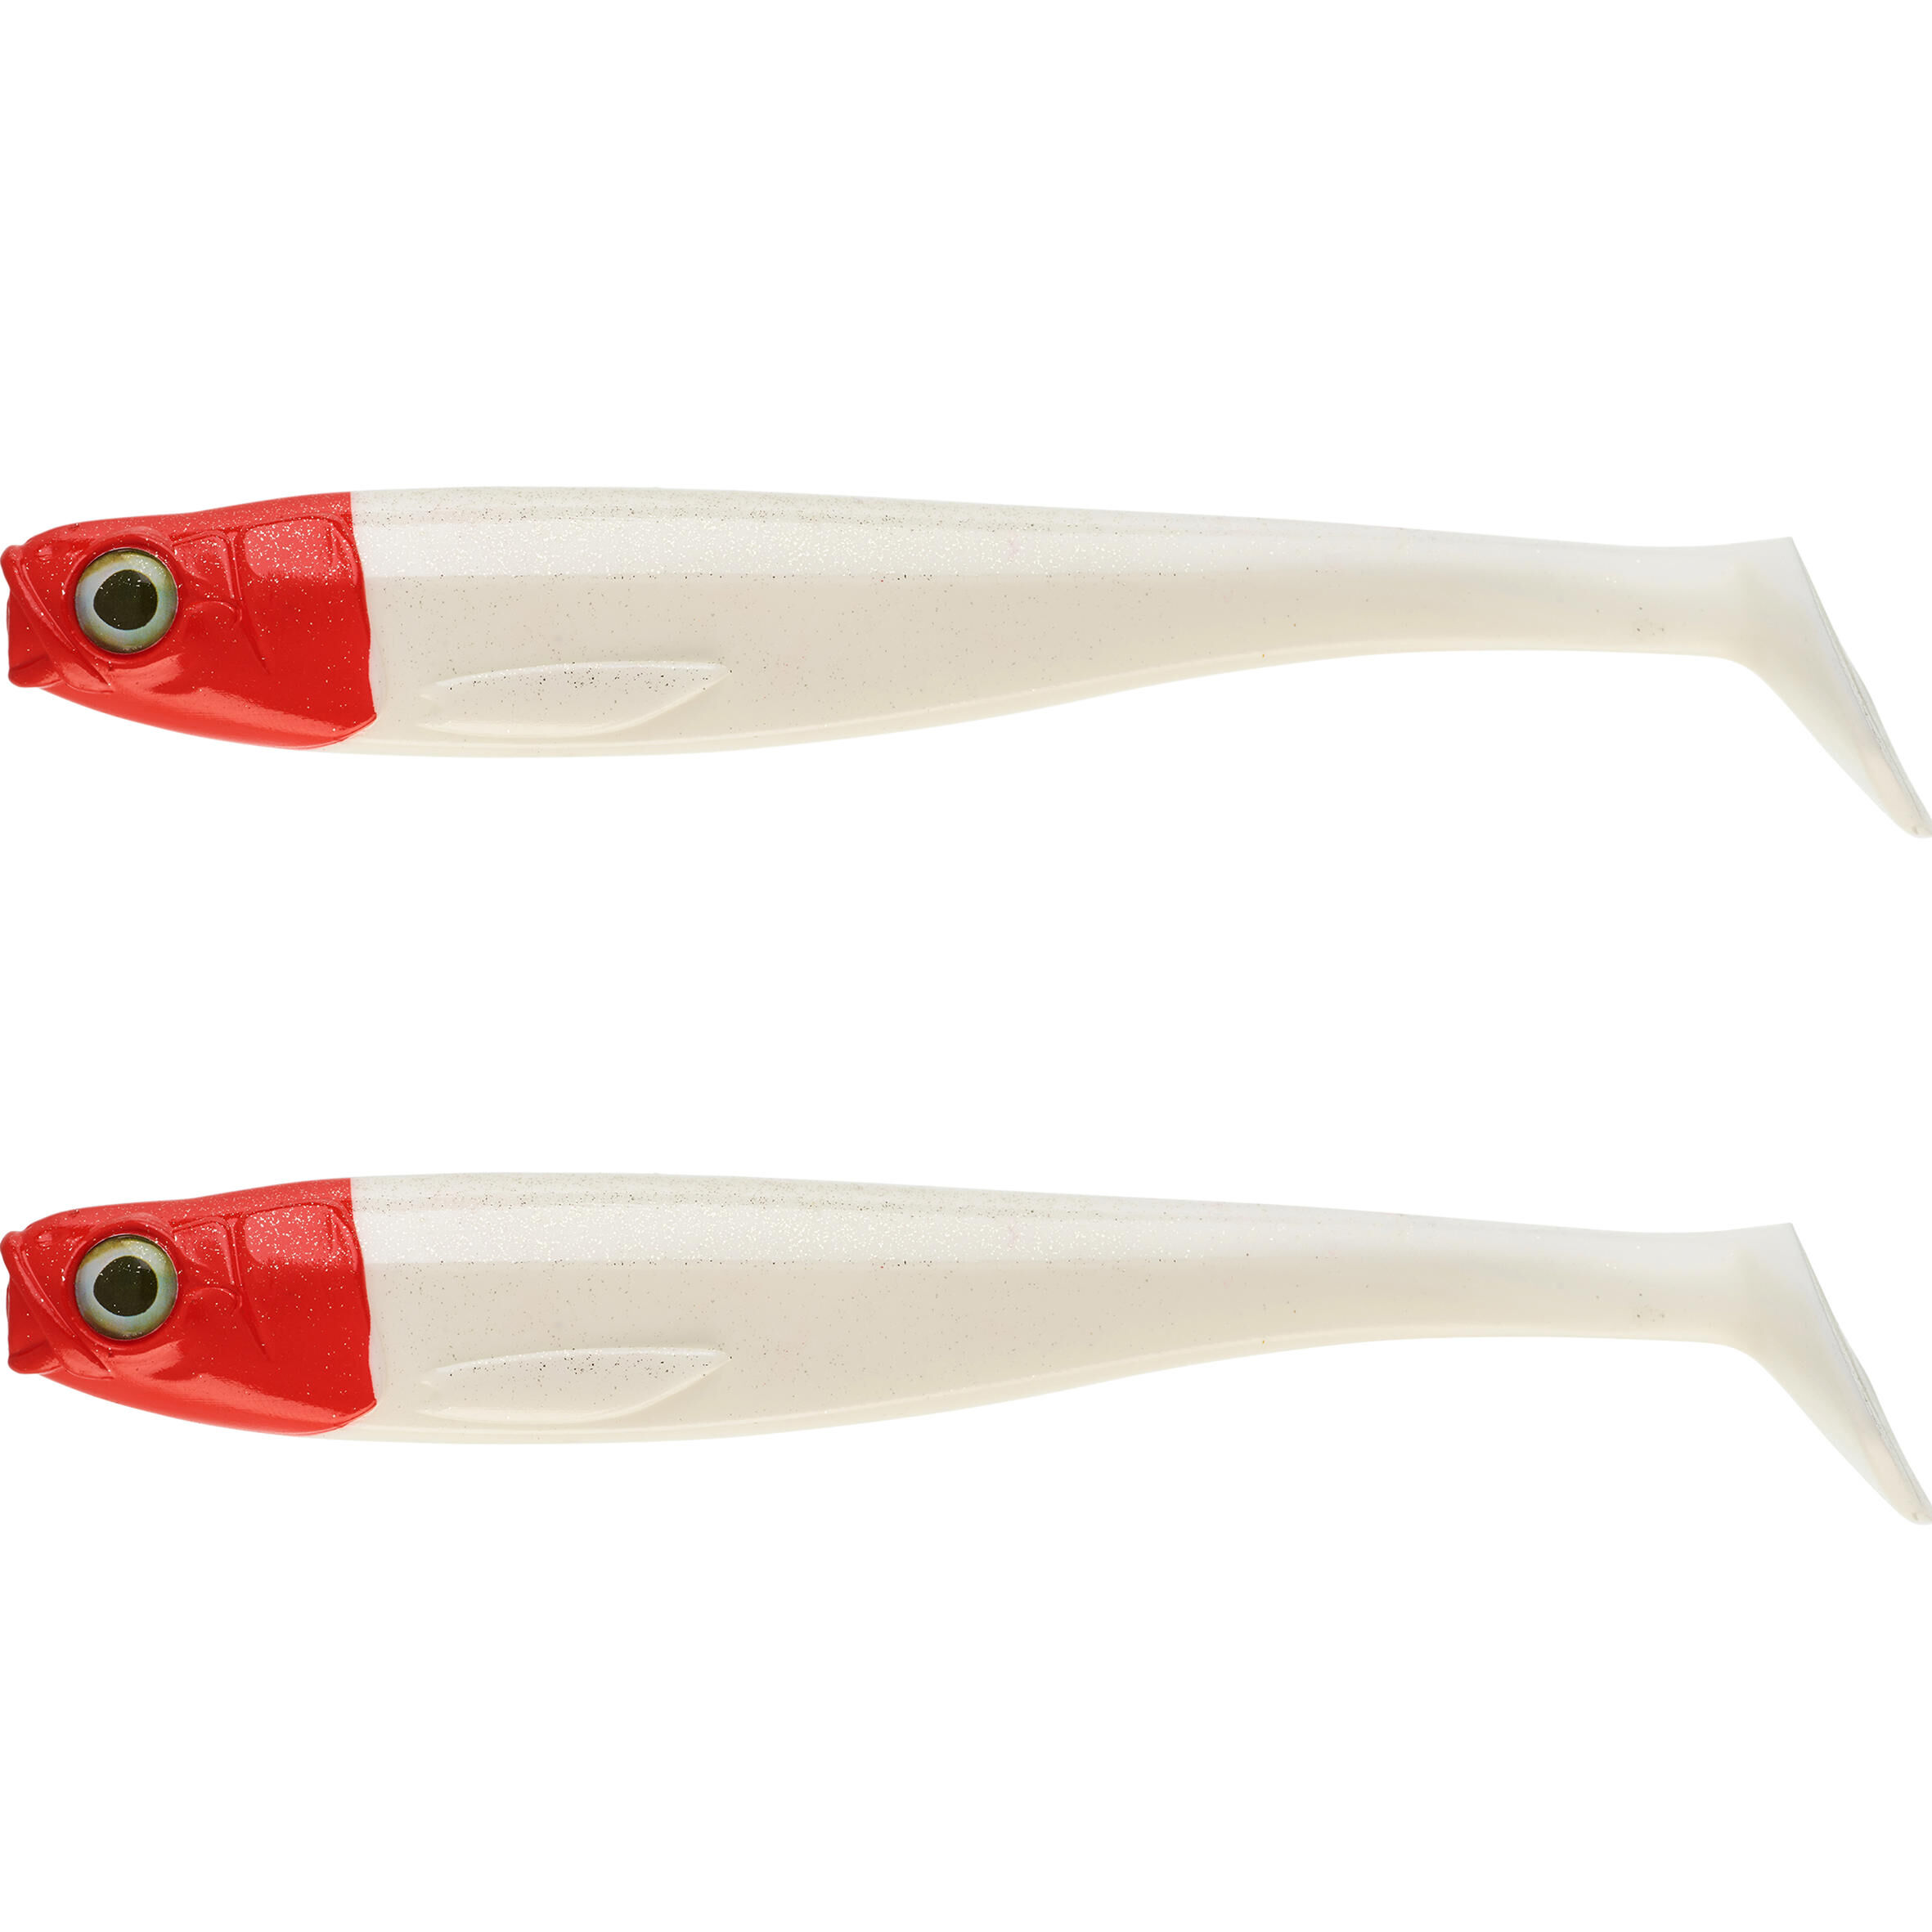 CAPERLAN SOFT LURE FISHING LURE ROGEN 120 RED HEAD X2